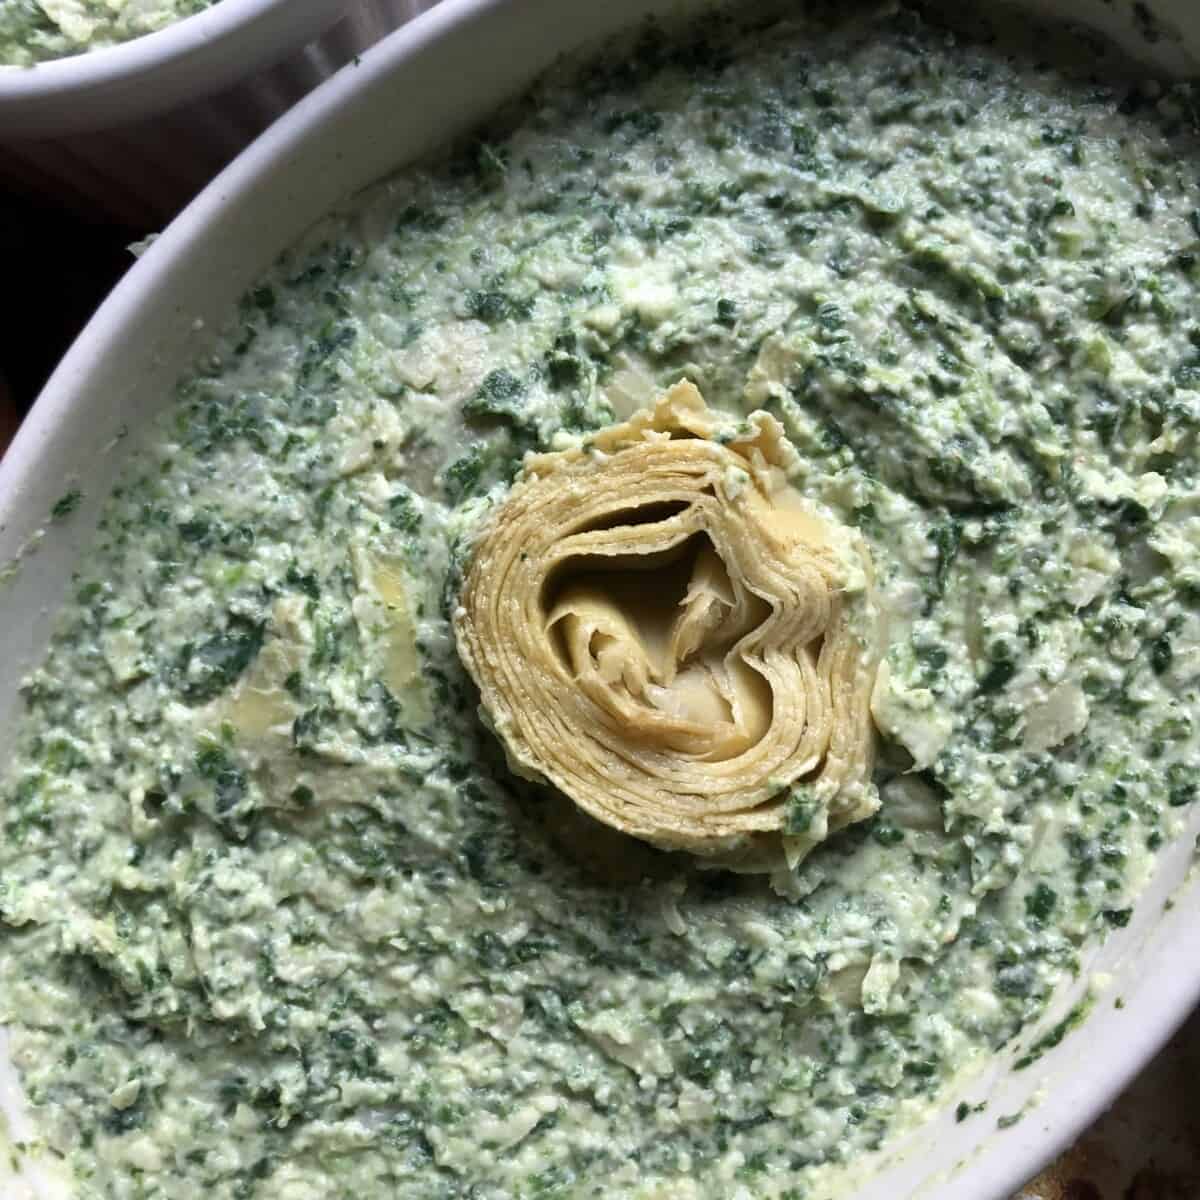 assembled unbaked oval ramekin filled with dip and an artichoke heart in the middle just barely sitting above the dip line